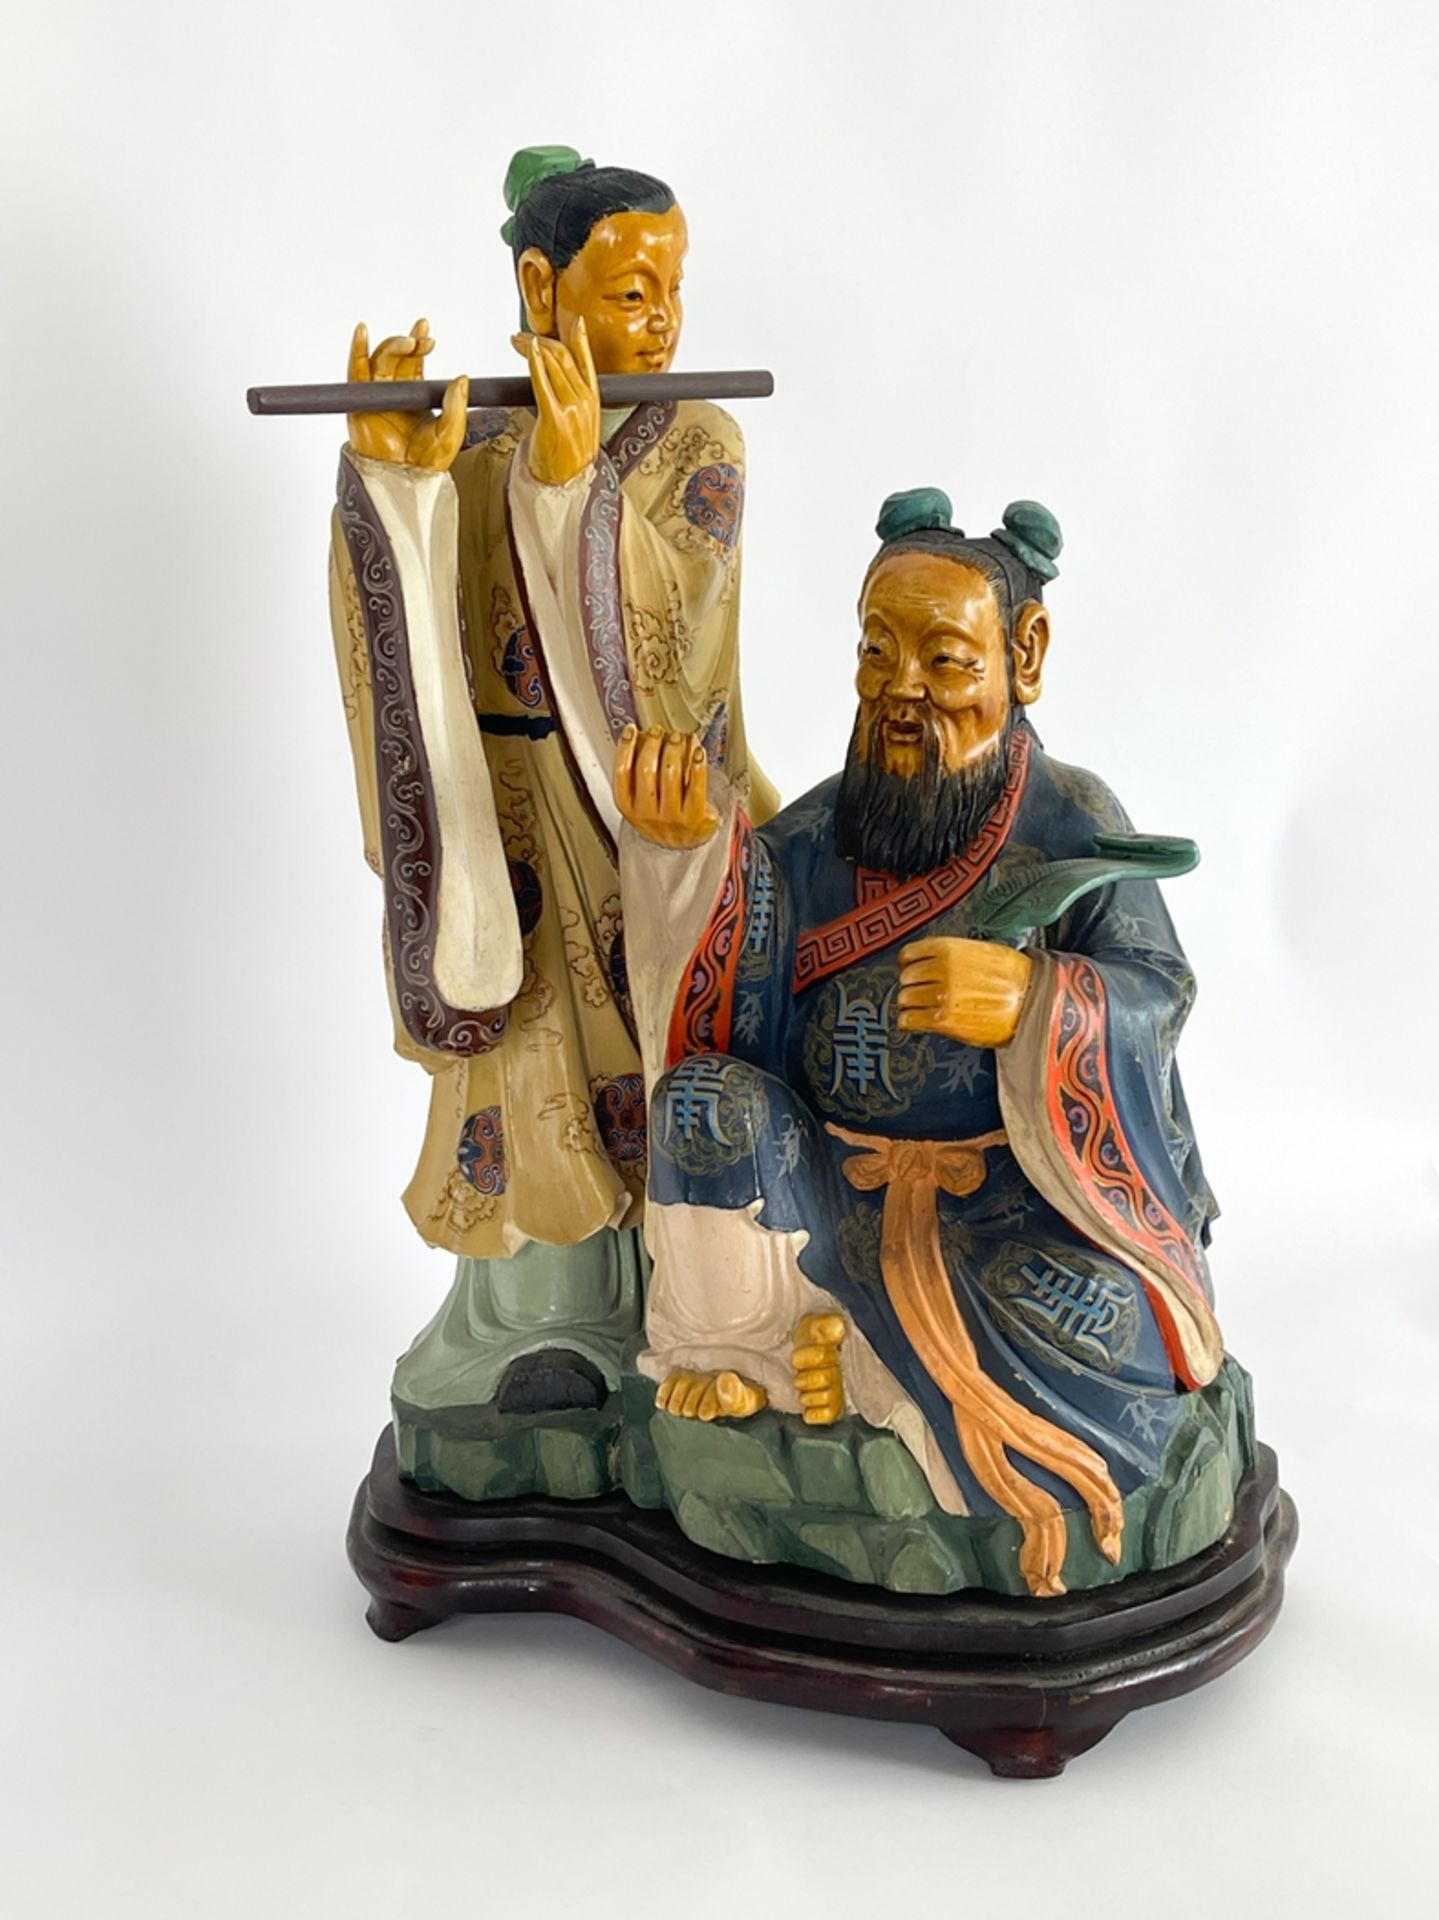 Chinese sculpture made from poplar wood and ivory - Image 4 of 13